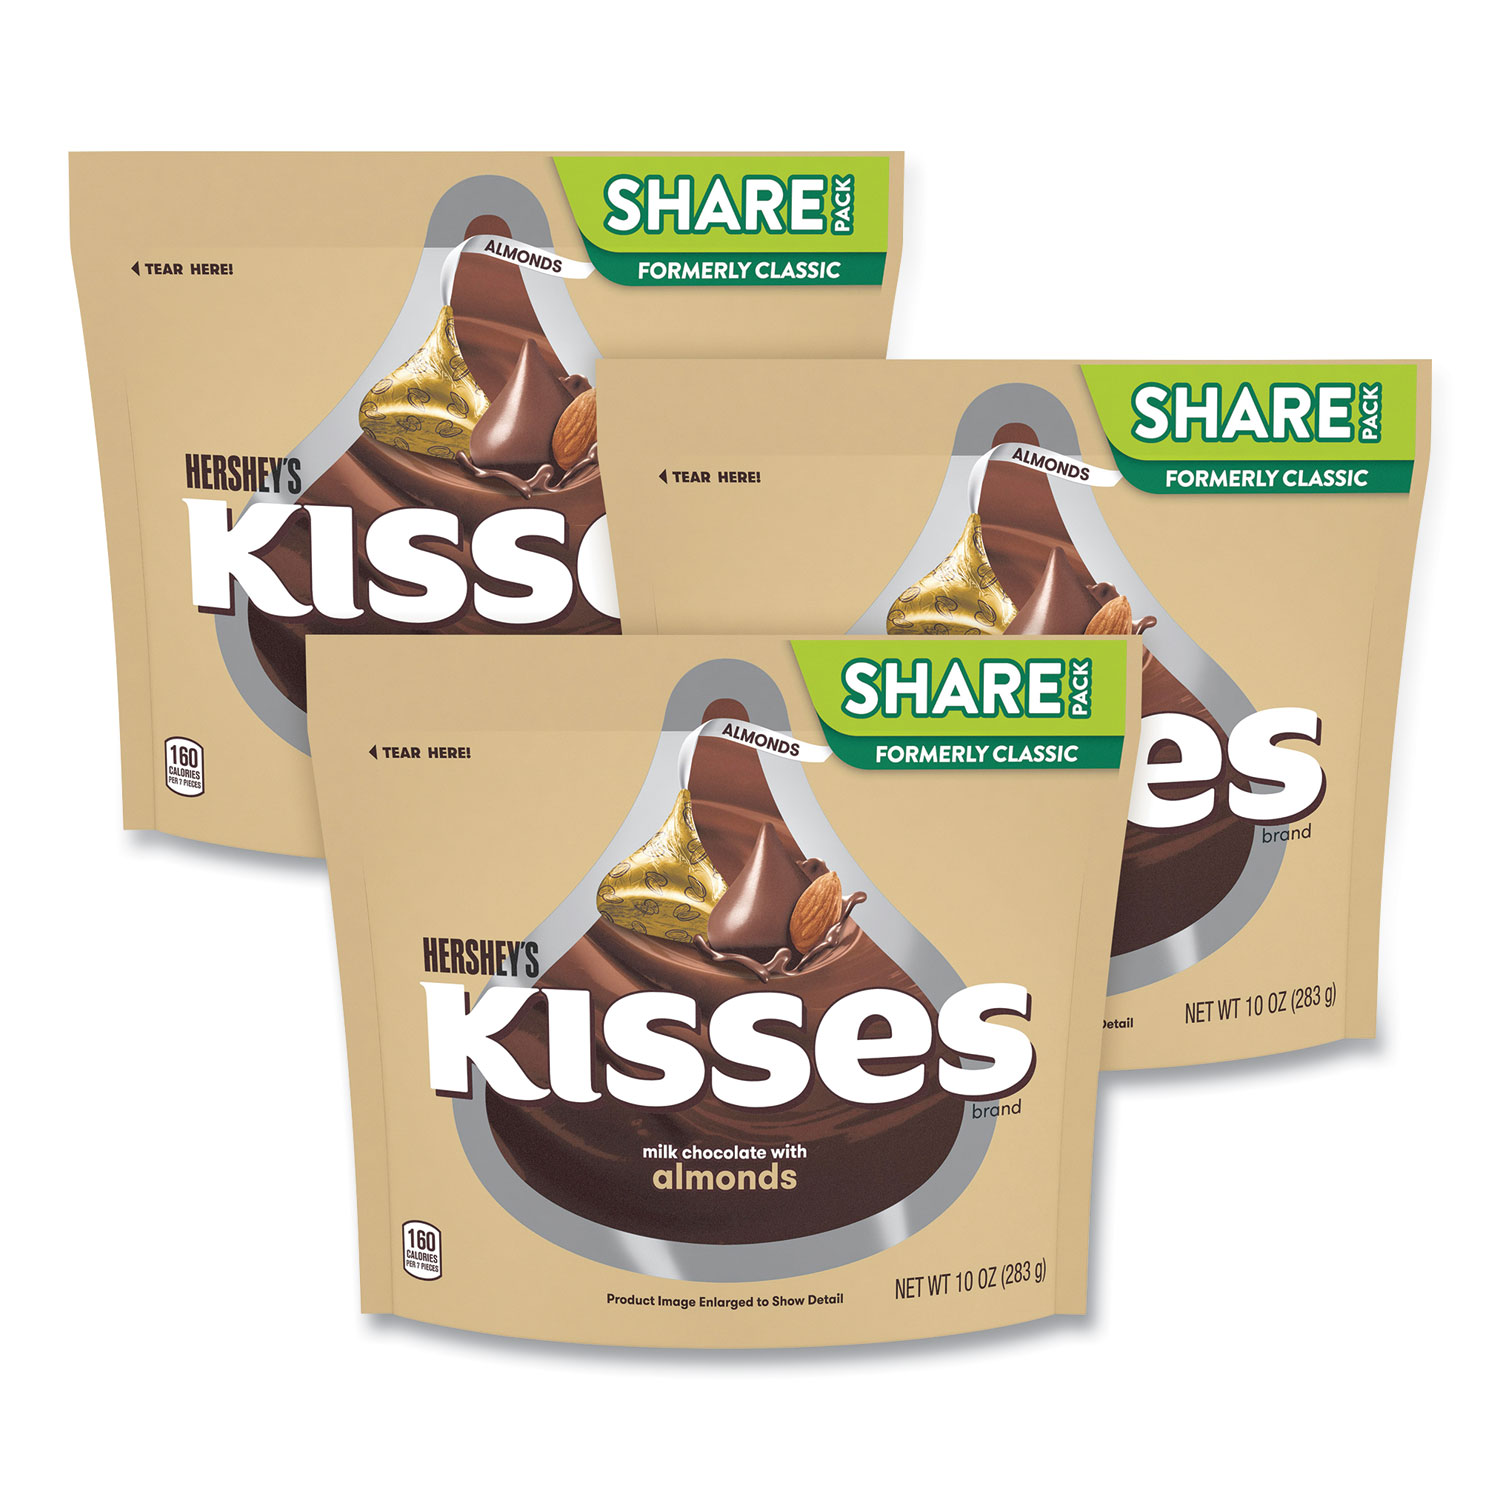  Hershey's 13453 KISSES Milk Chocolate with Almonds, Share Pack, 10 oz Bag, 3 Bags/Pack, Free Delivery in 1-4 Business Days (GRR24600422) 